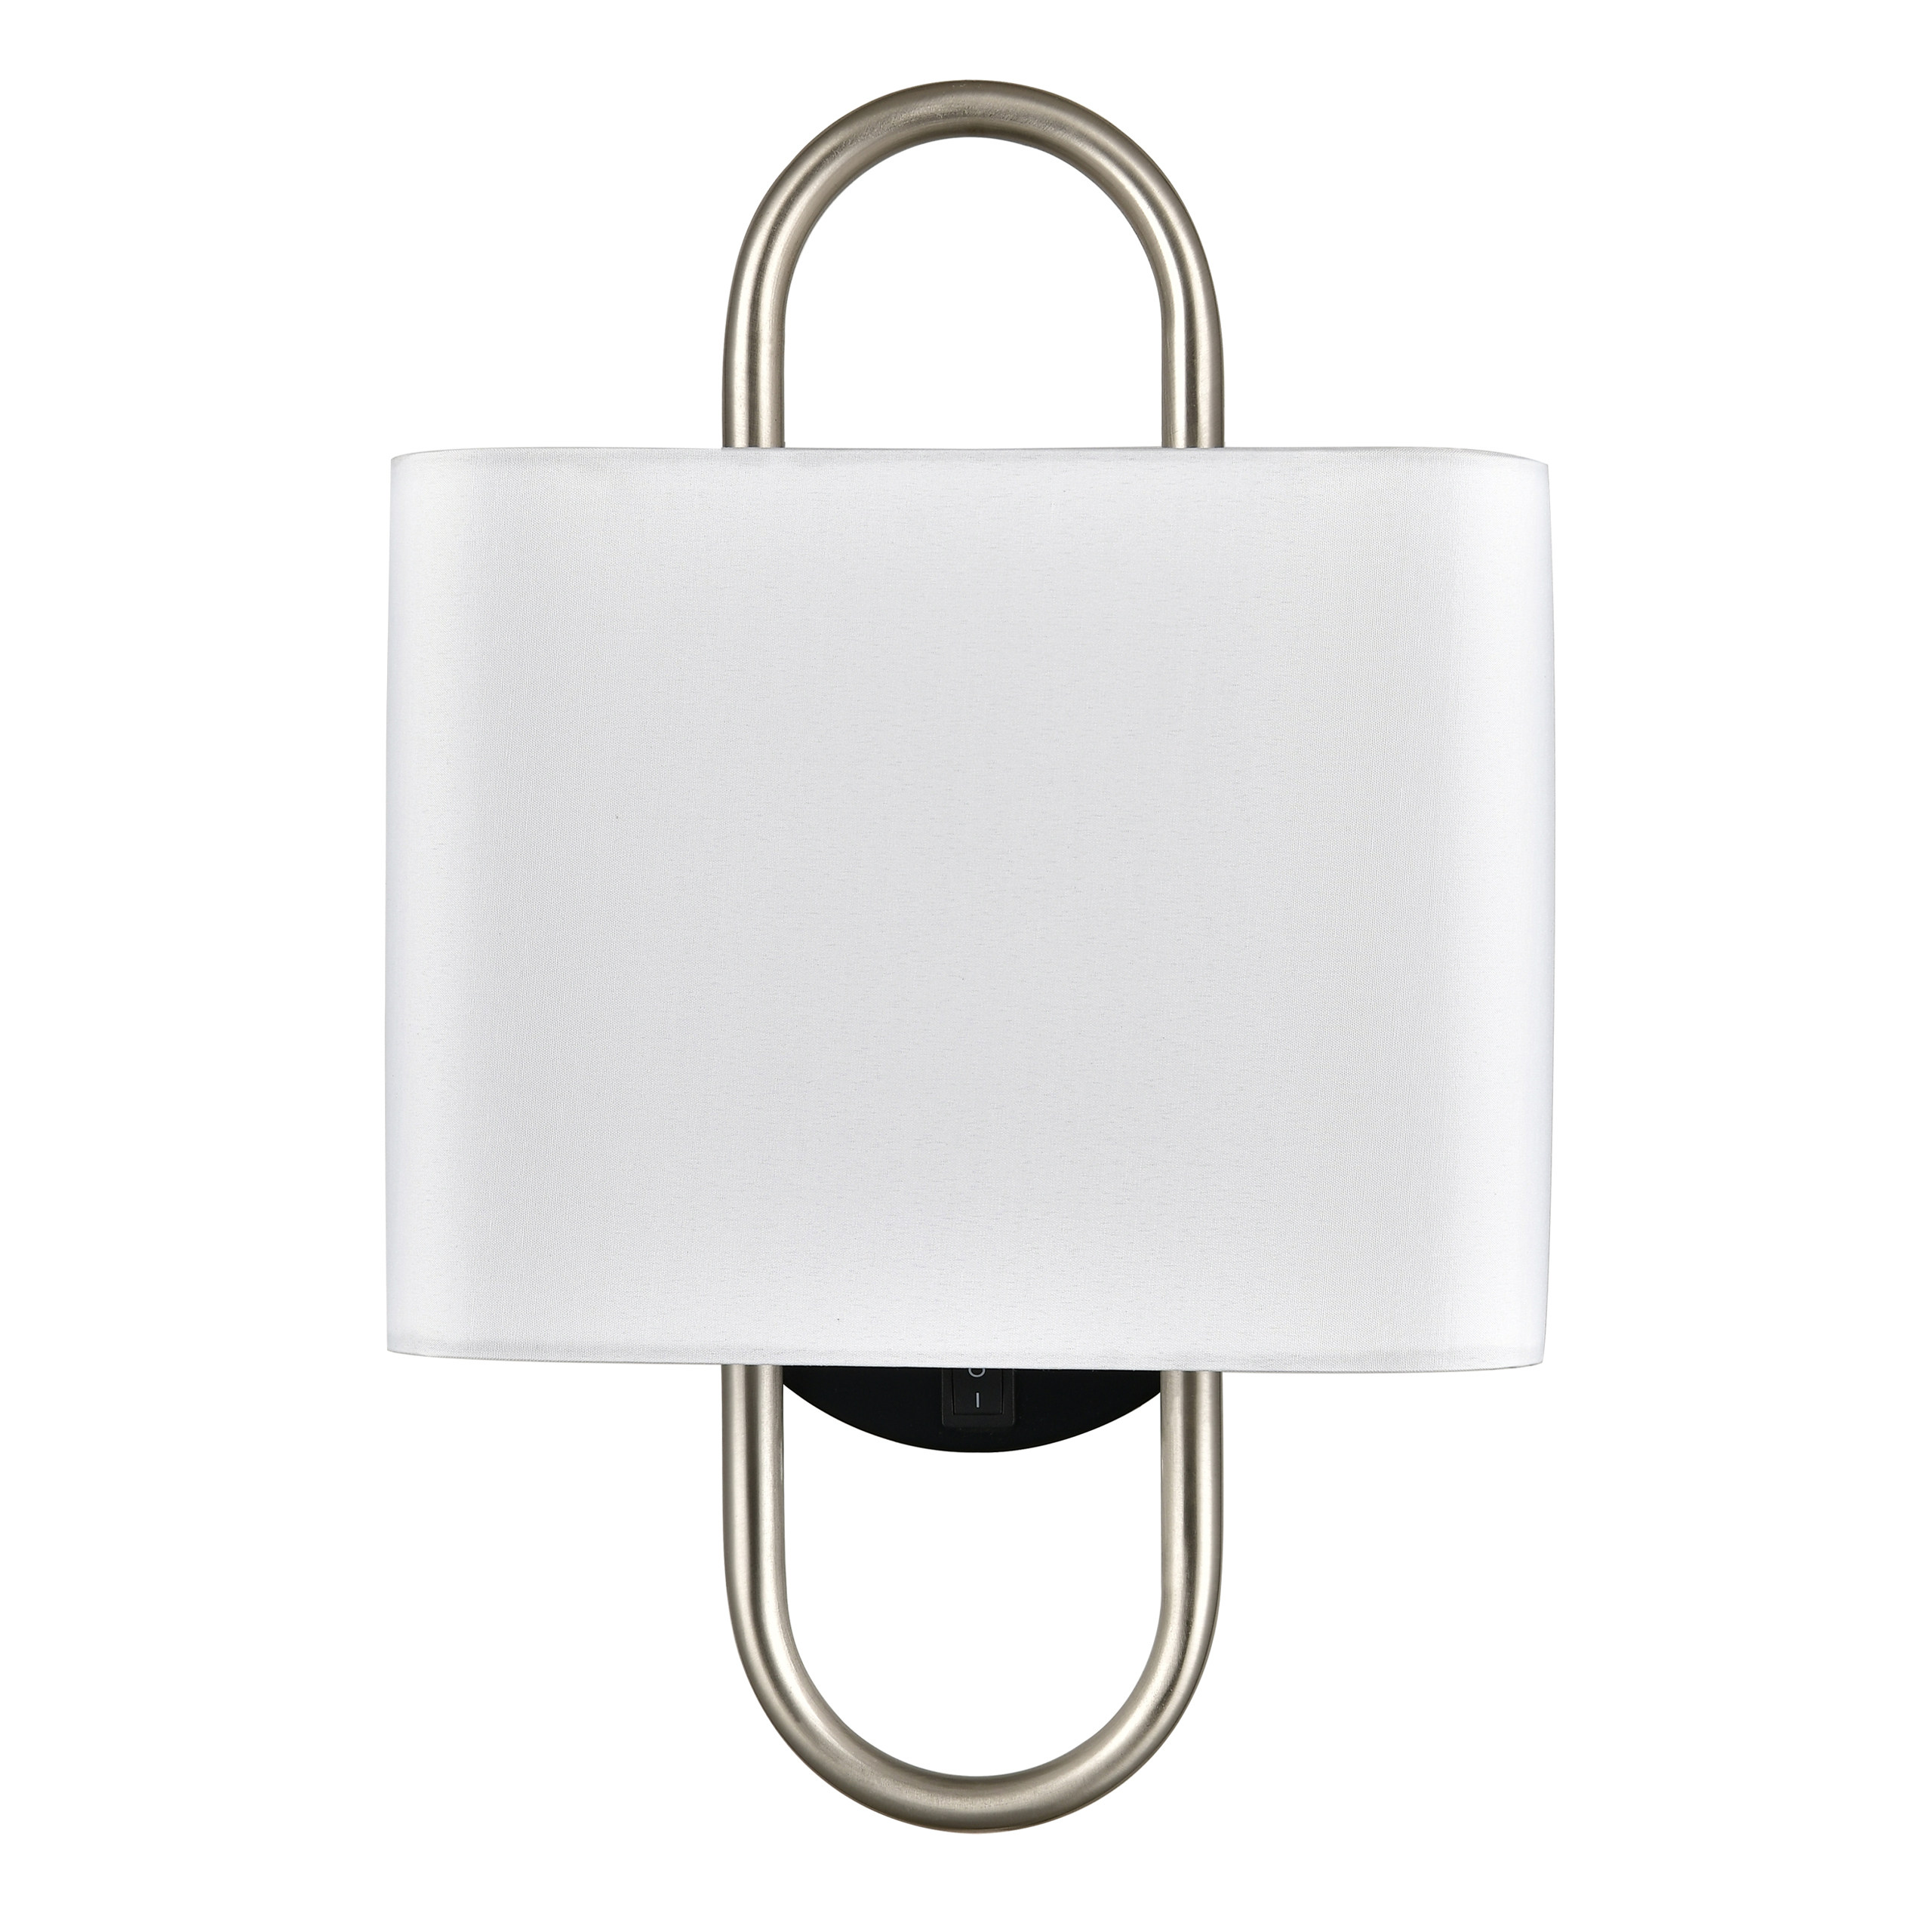 Wall Lamp Brushed Nickel Plus Powder Coated Matte Black Without USB